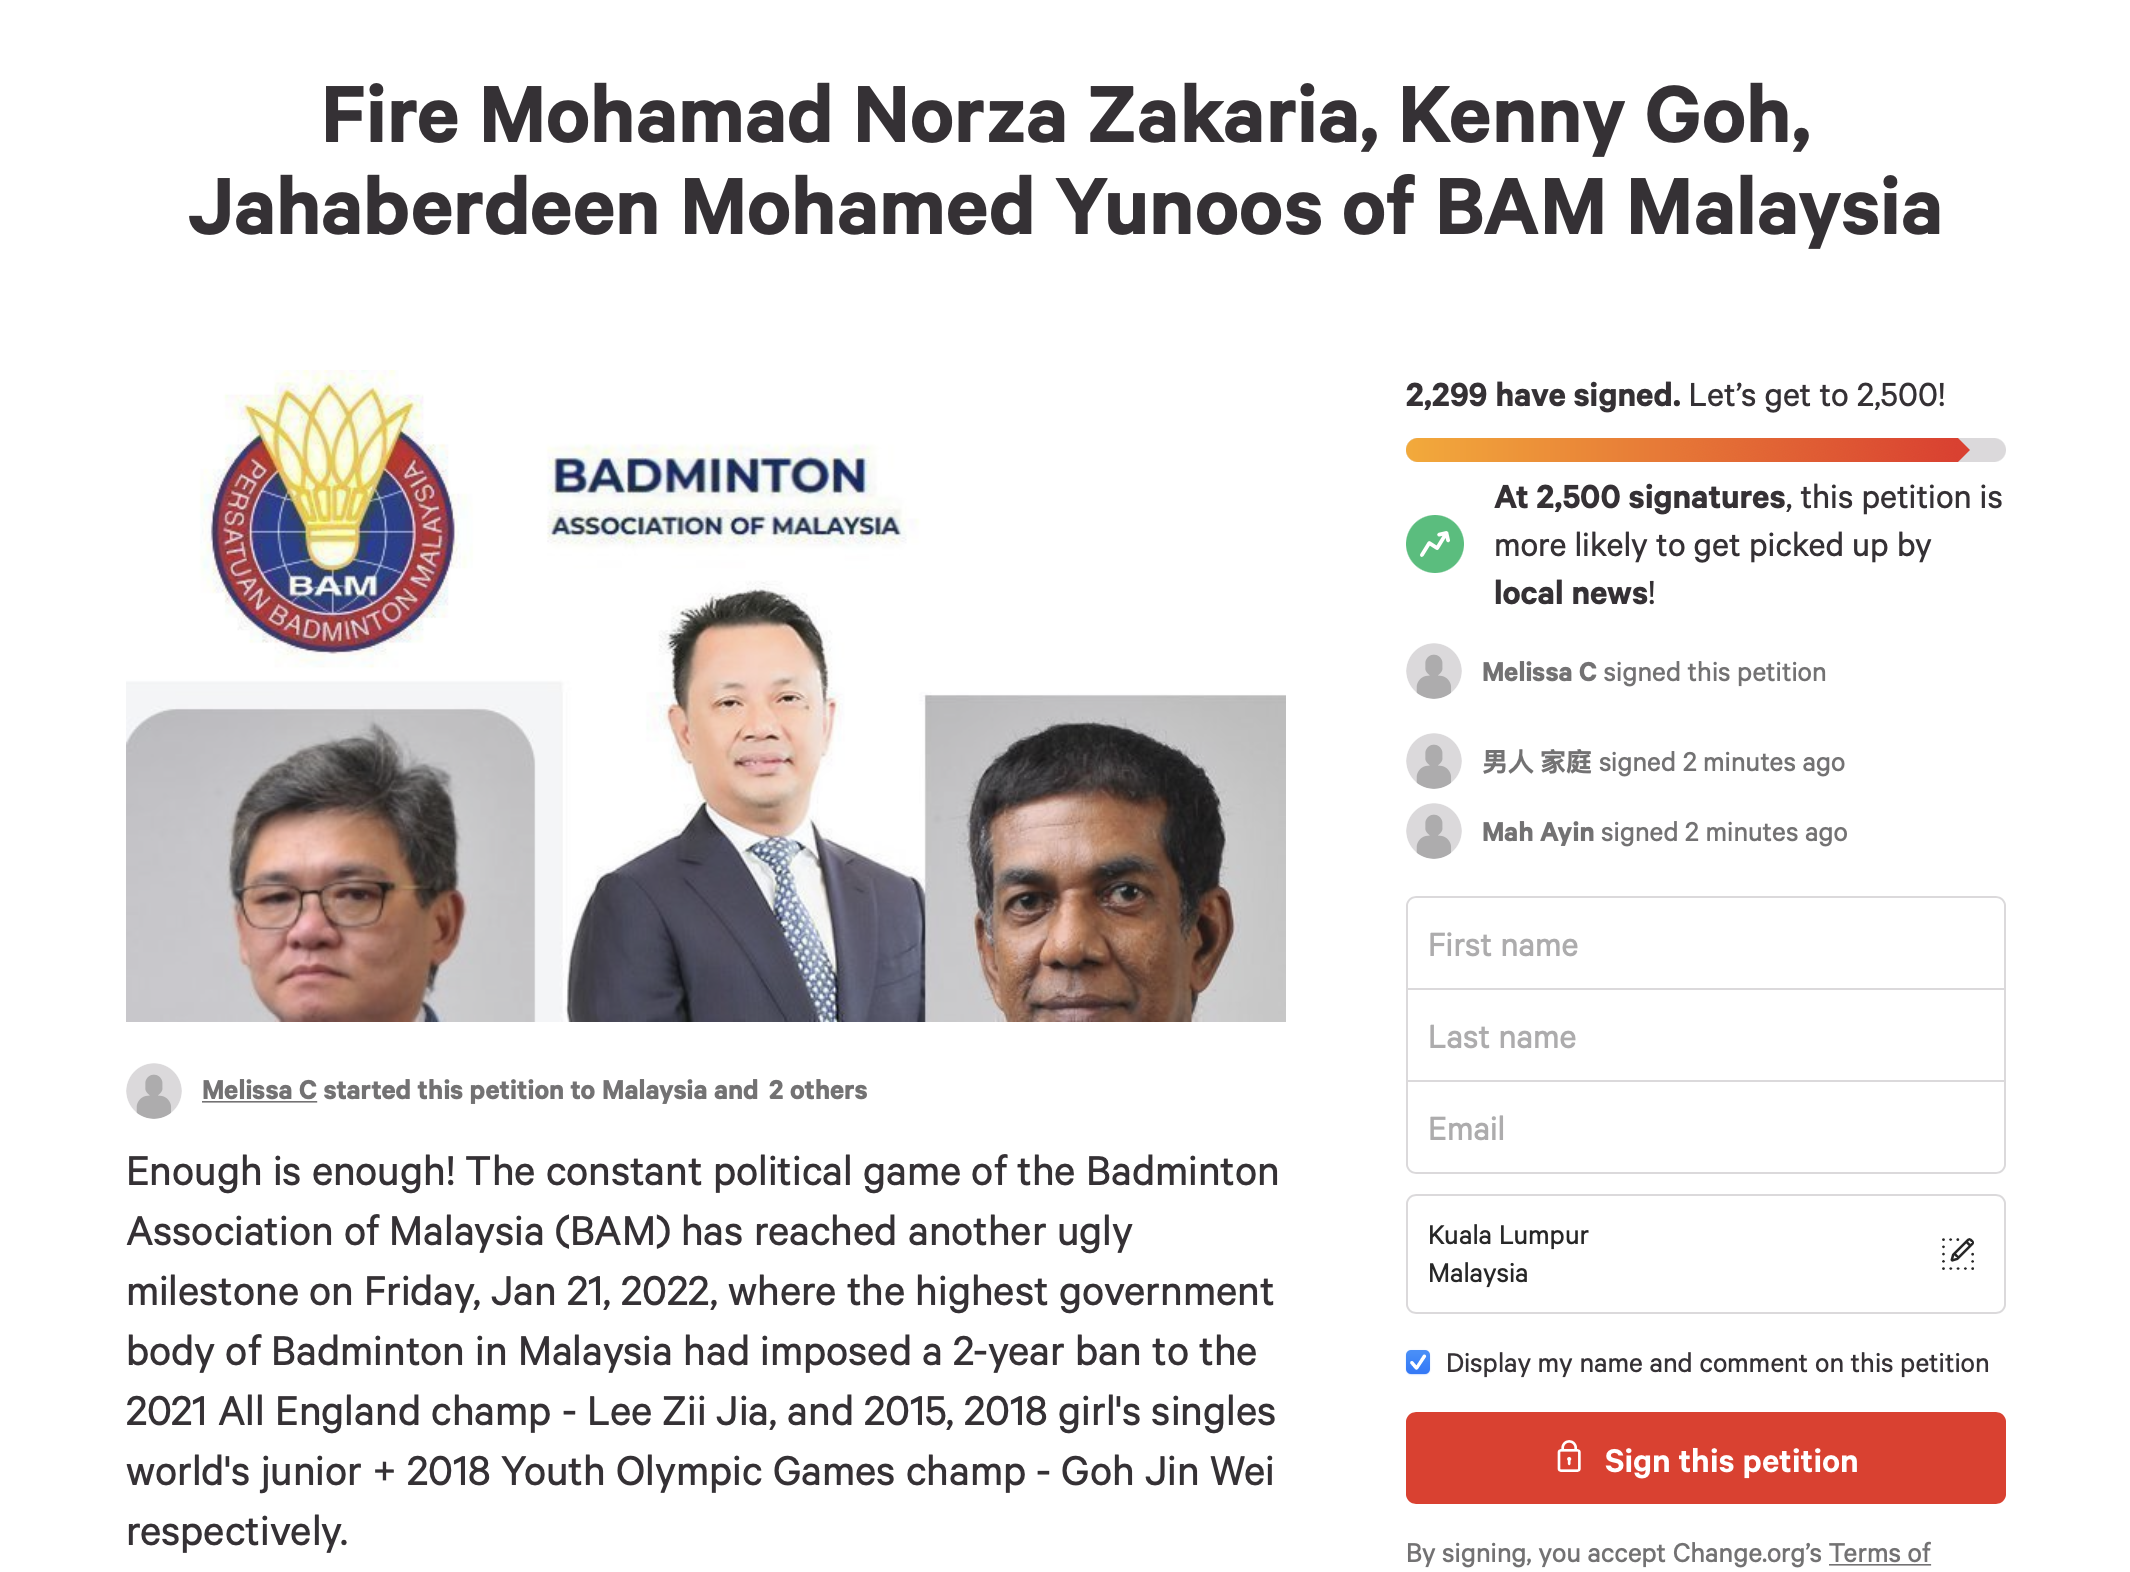 Petition urging bam to lift lee zii jia and goh jin wei's ban receives 100,000 signatures within 2 days | weirdkaya